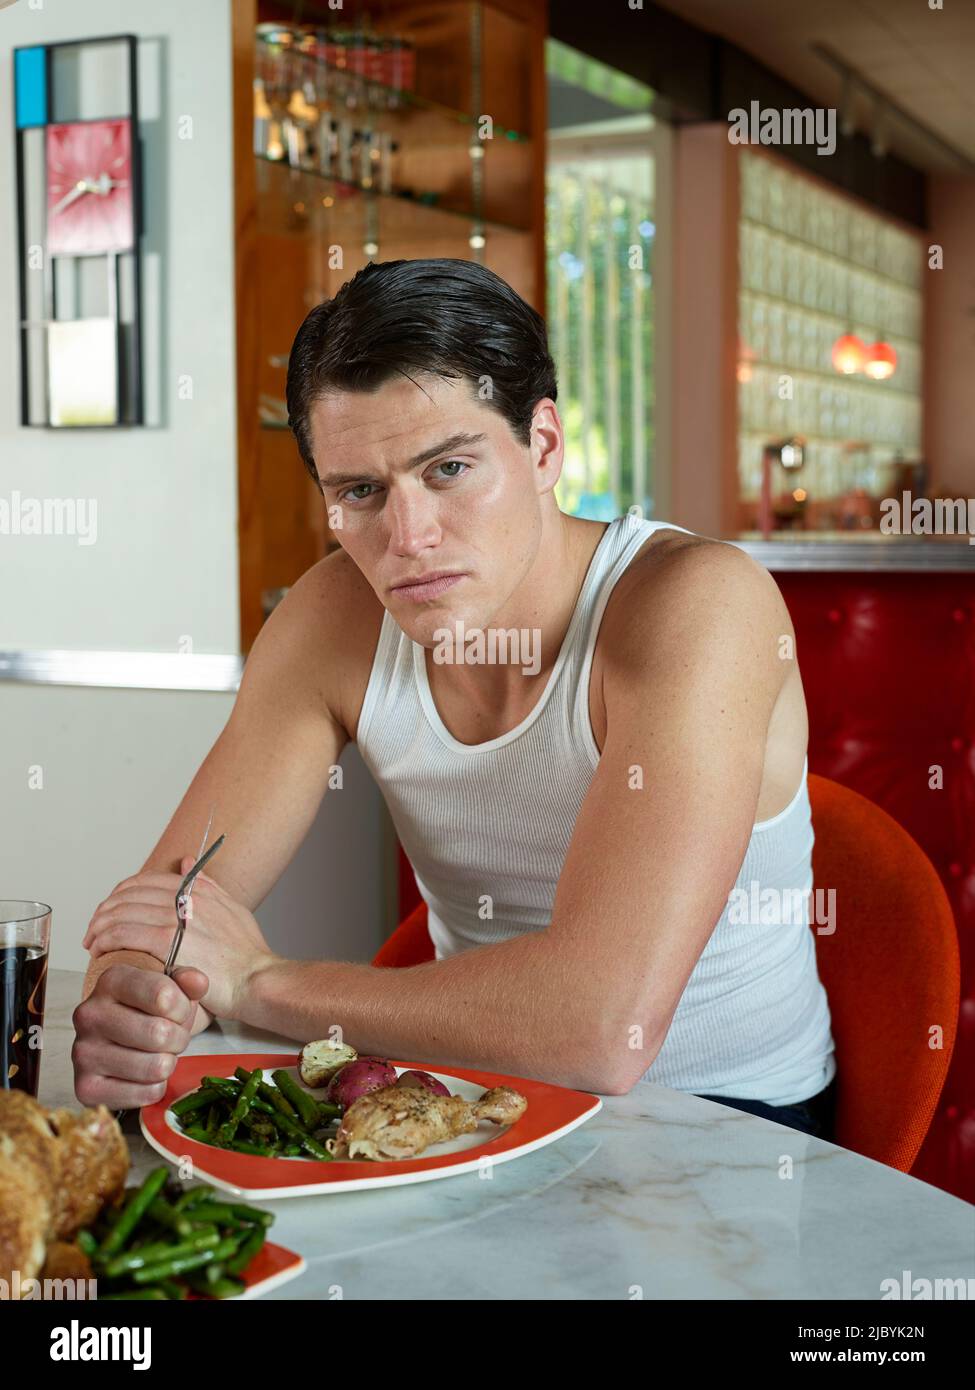 Portrait of a man sitting at a dining table in a mid-century modern home. Stock Photo